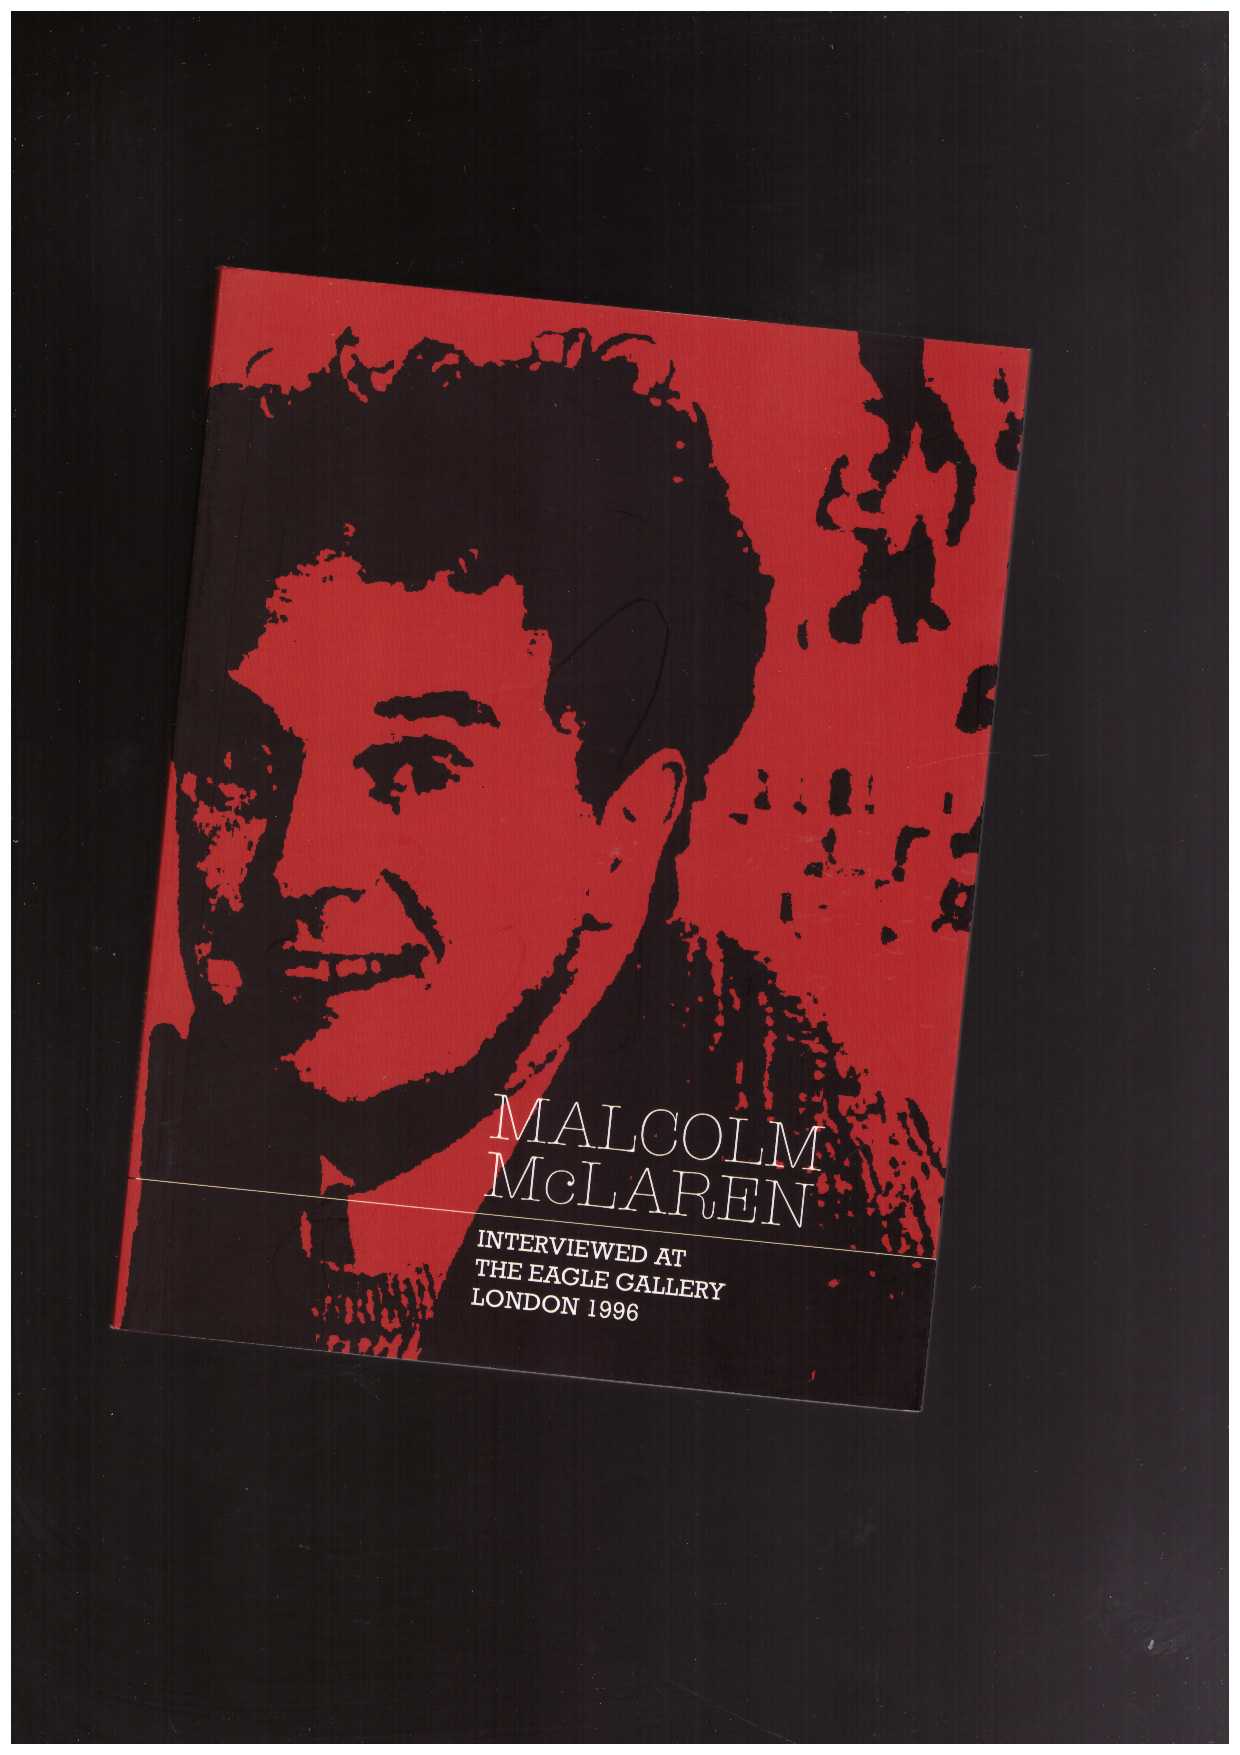 MCLAREN, Malcolm - Malcolm McLaren Interviewed at The Eagle Gallery, London 1996